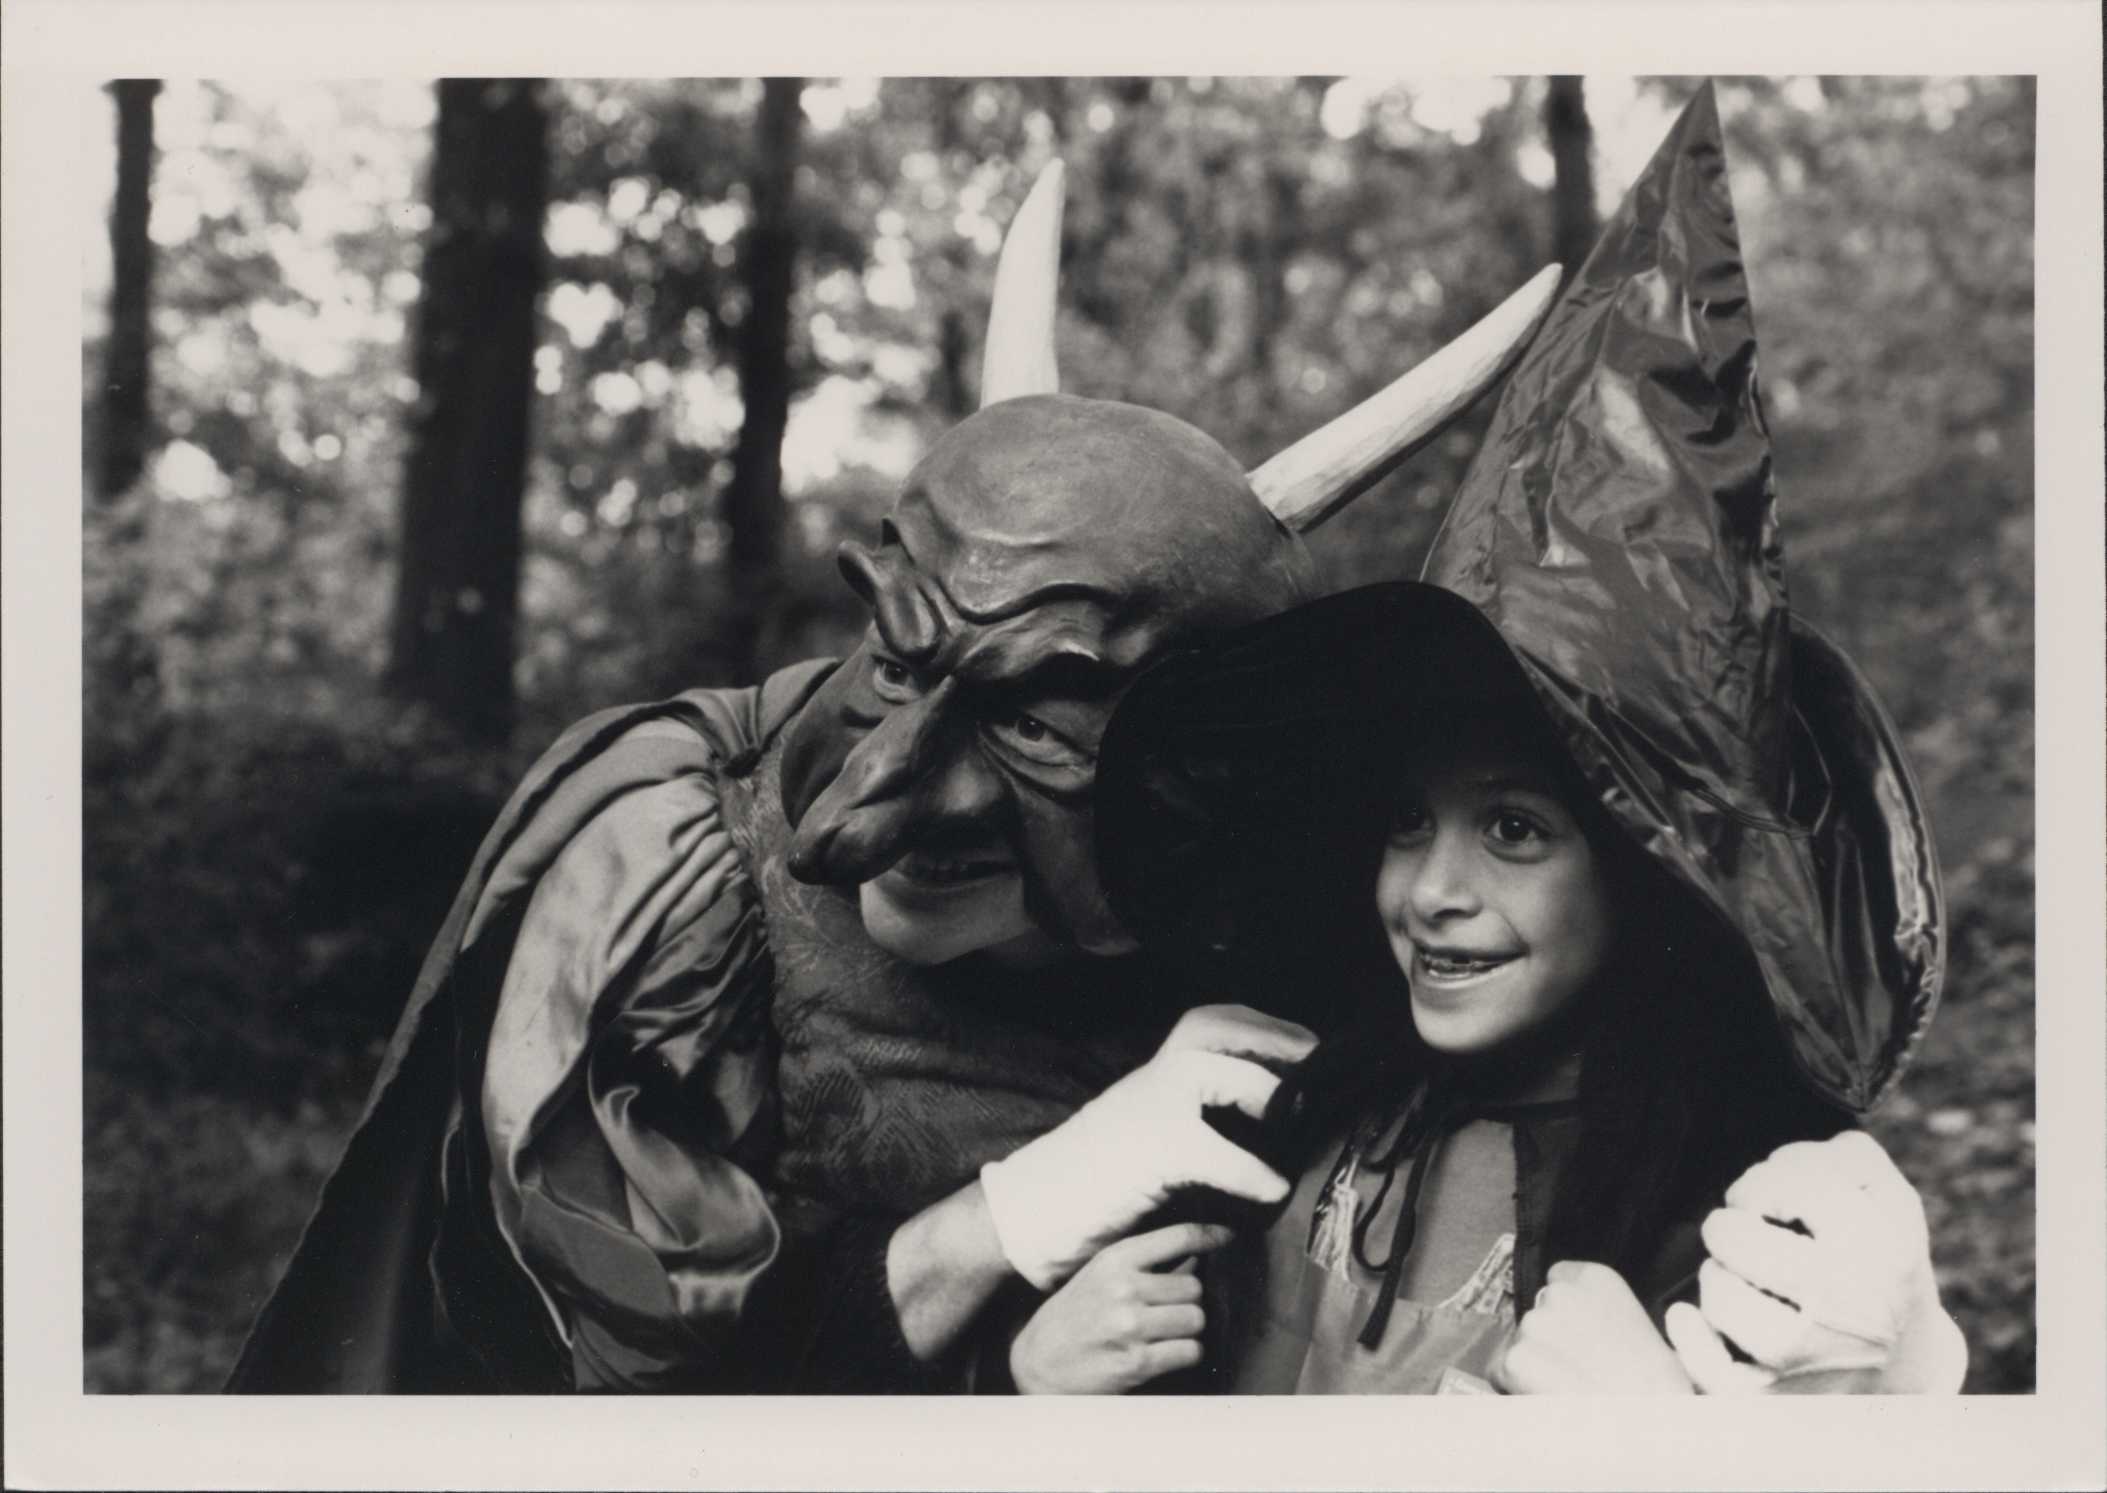 People in witch and devil costumes smile for a photo in black and white